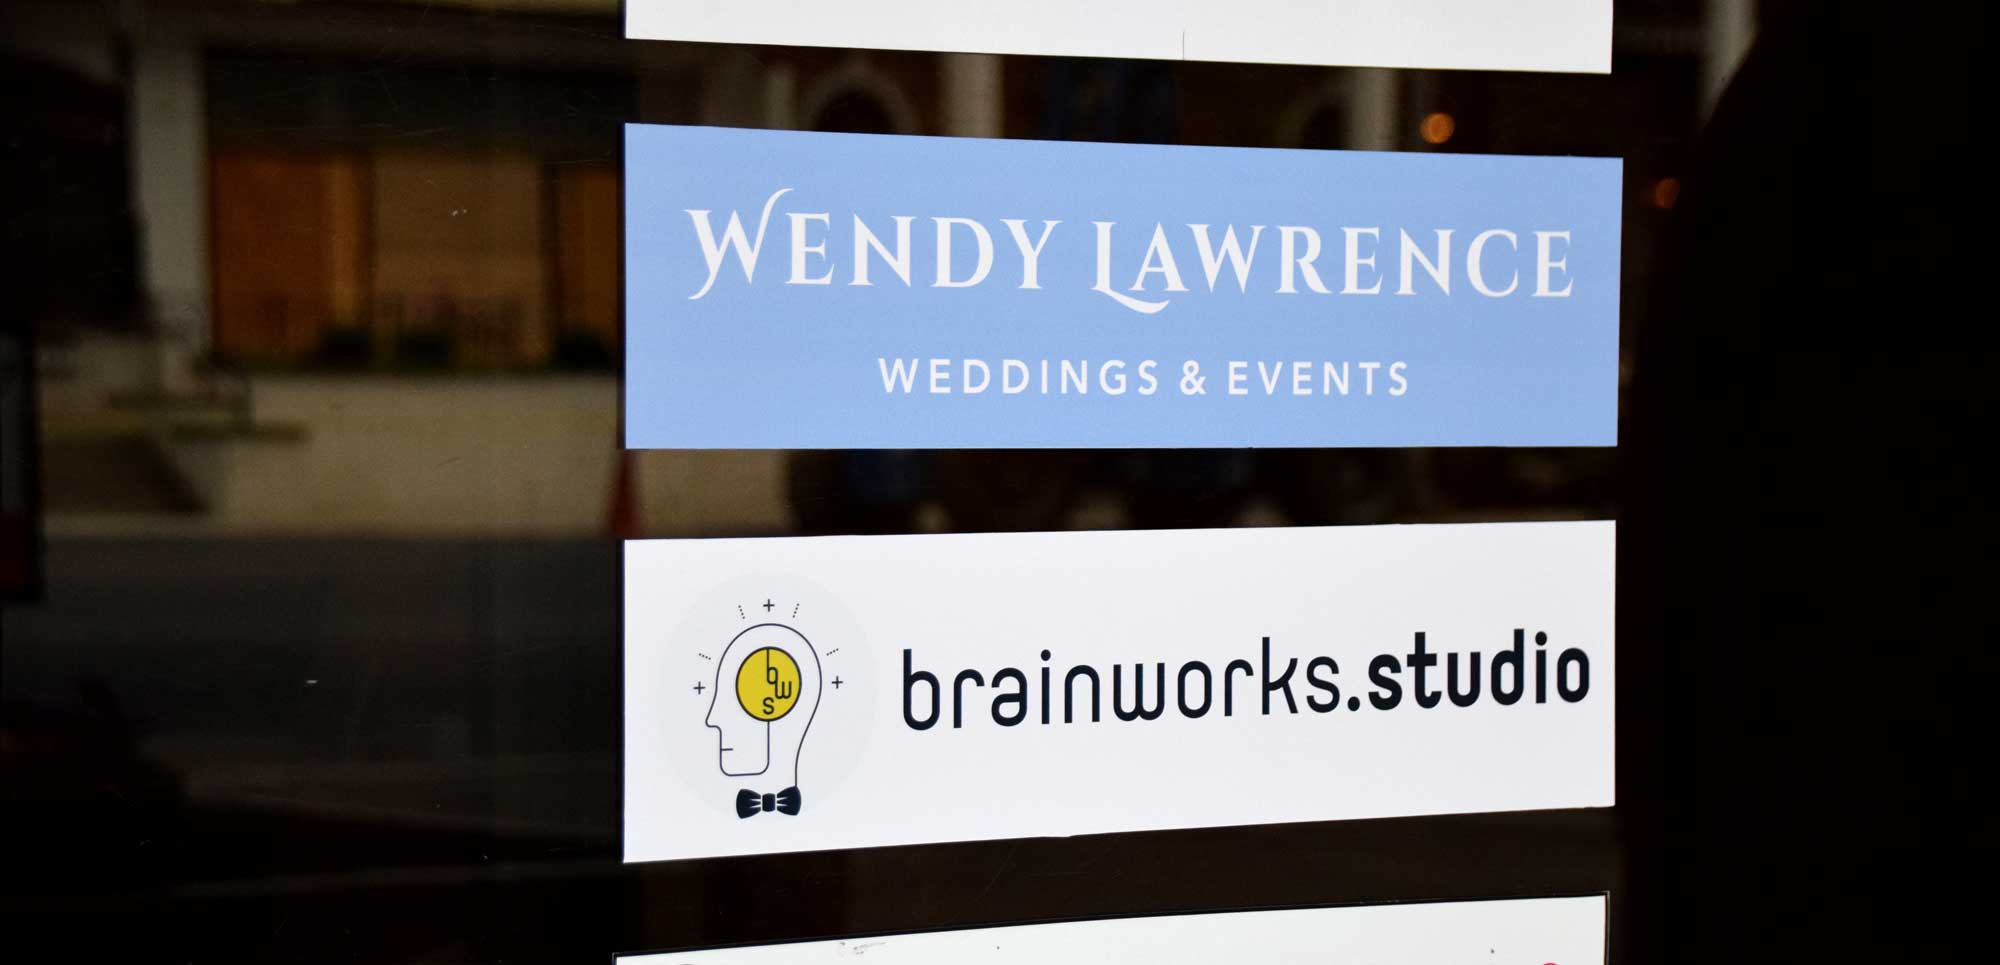 Photo of glass door signage for Wendy Lawrence Weddings & Events and Brainworks Studio.